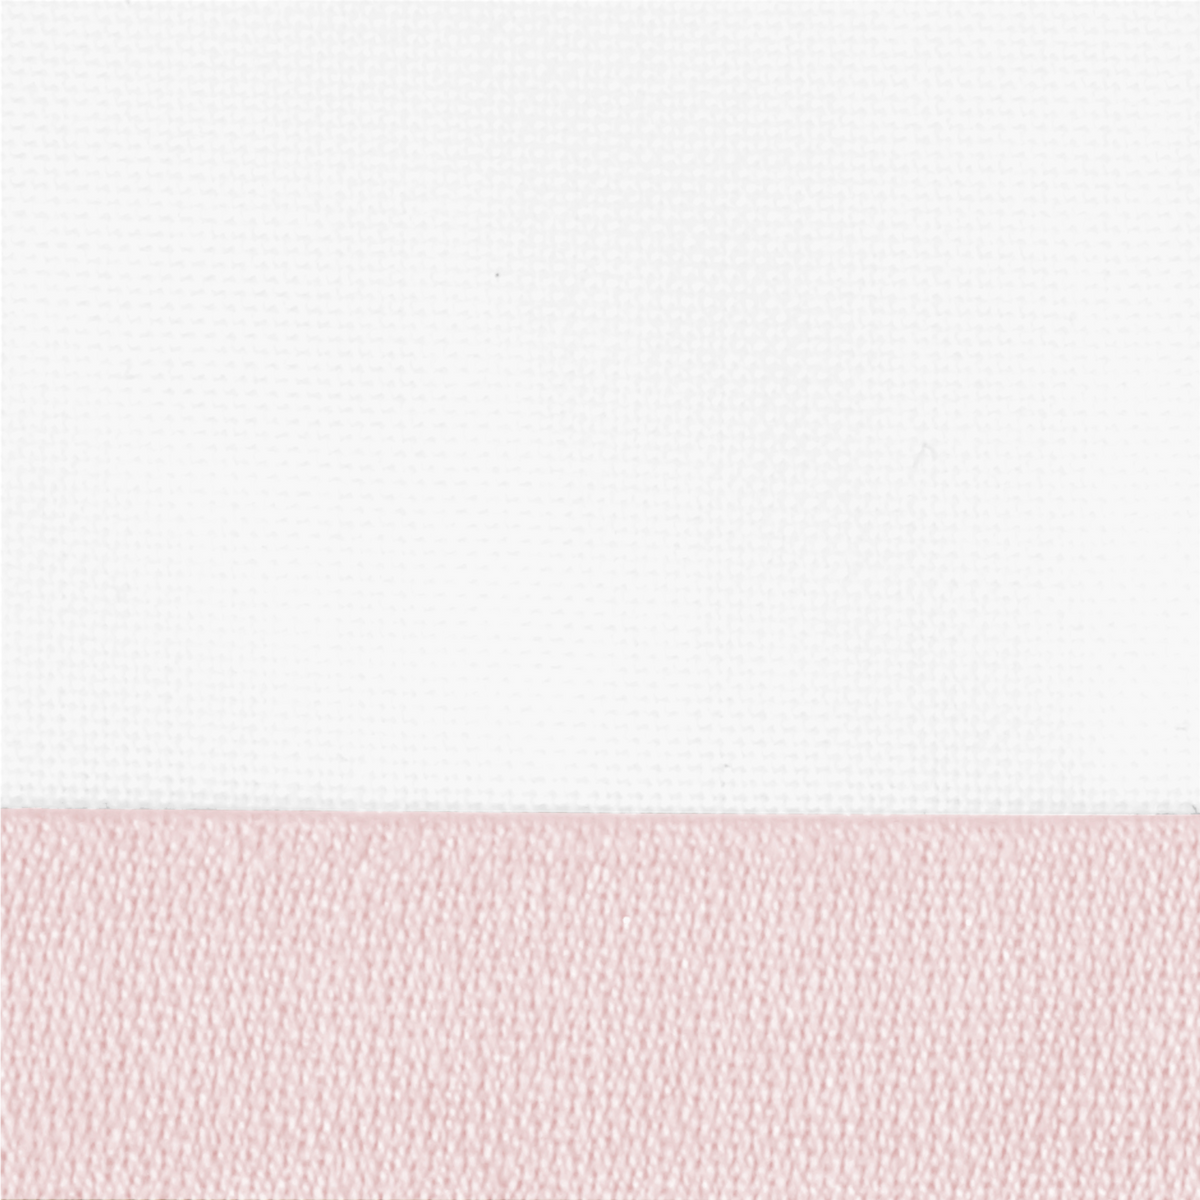 Swatch Sample of Matouk Gatsby Bedding Collection Blush Color